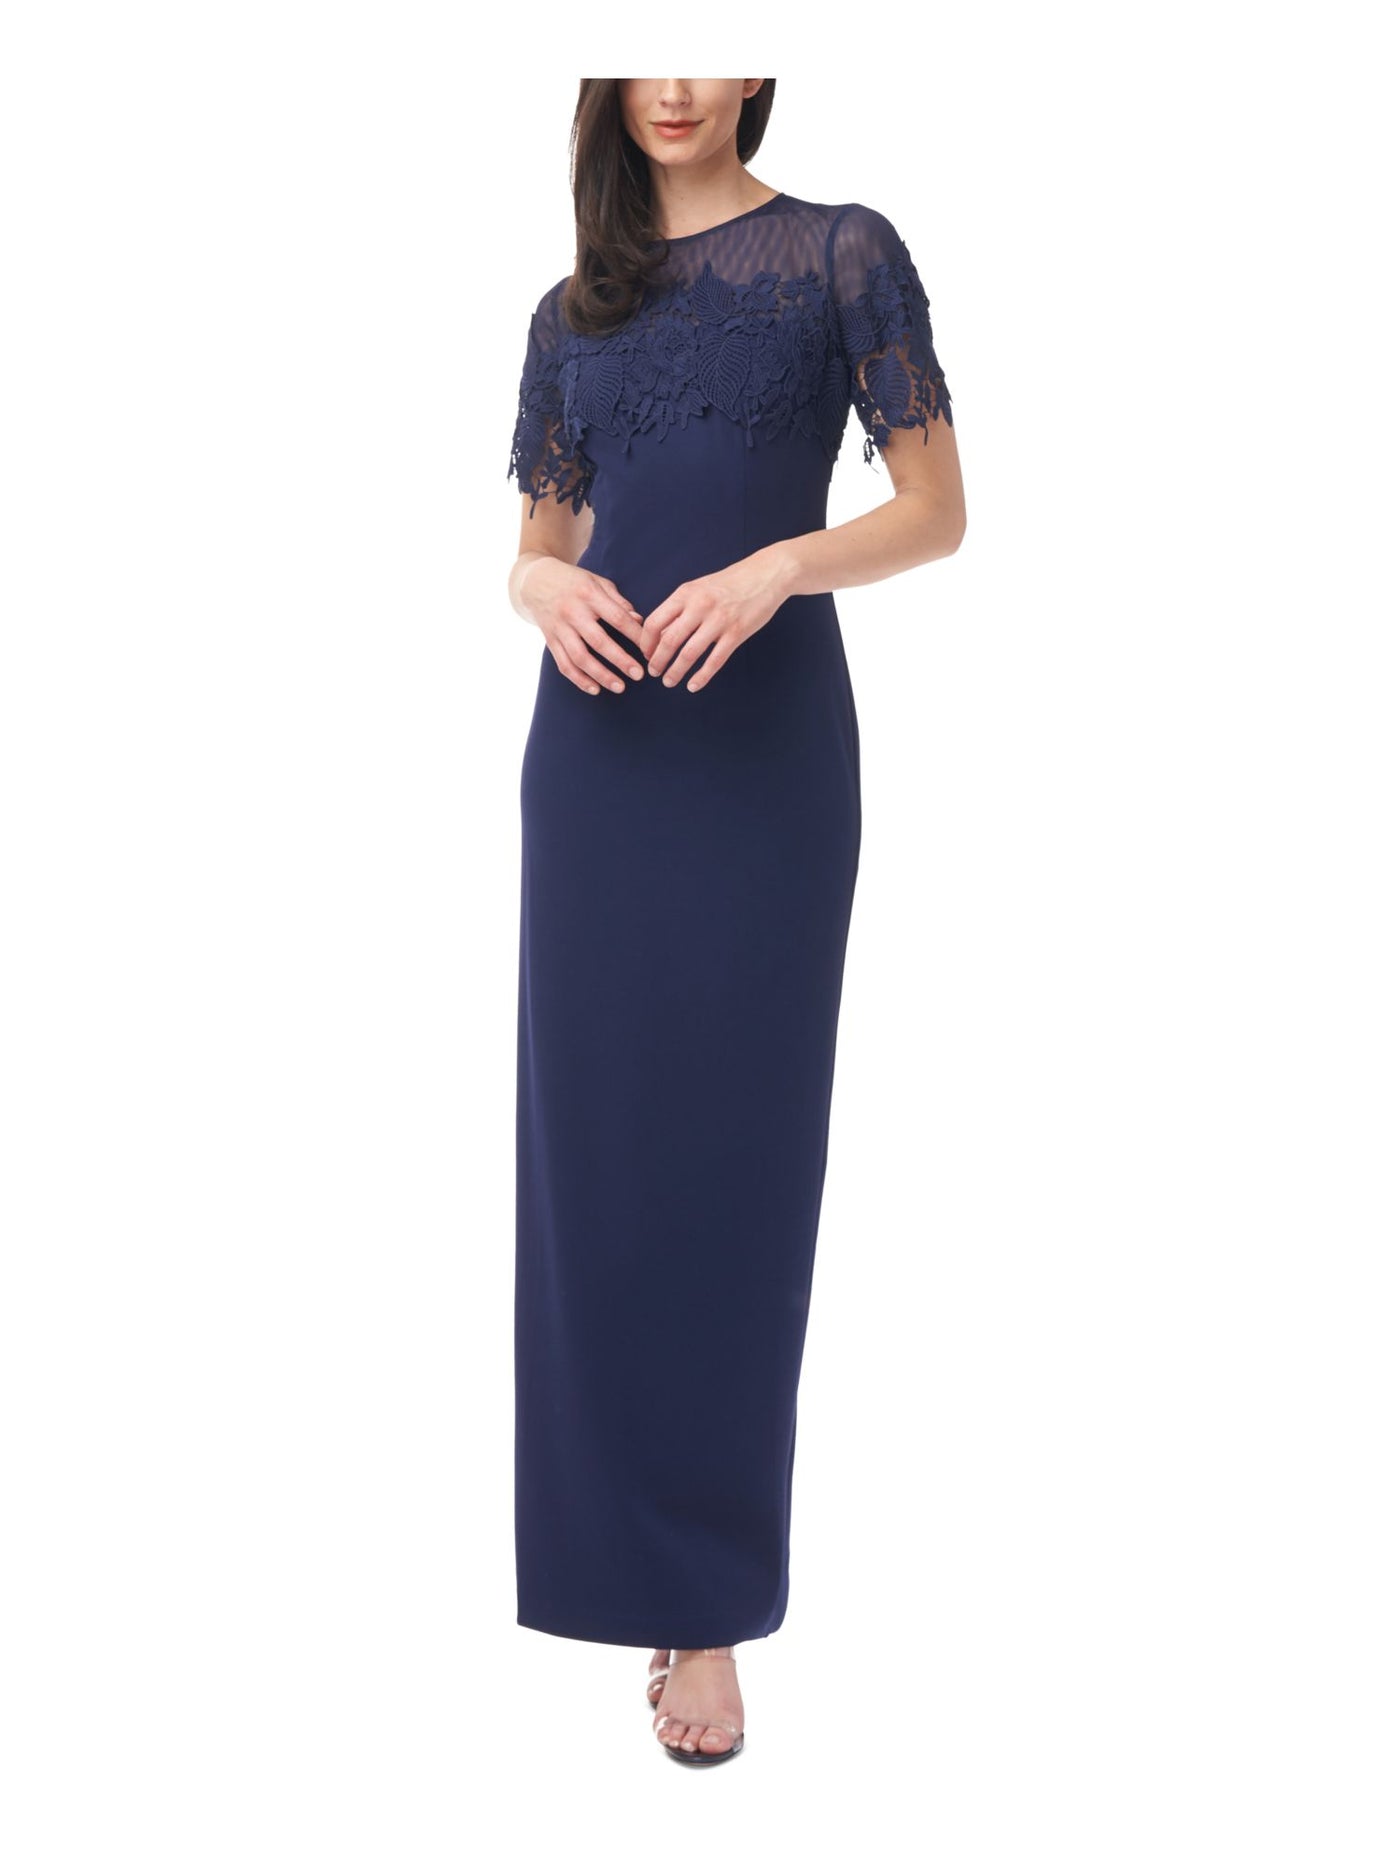 JS COLLECTIONS Womens Navy Stretch Zippered Embroidered Illusion Yoke Gown Short Sleeve Crew Neck Maxi Evening Gown Dress 2